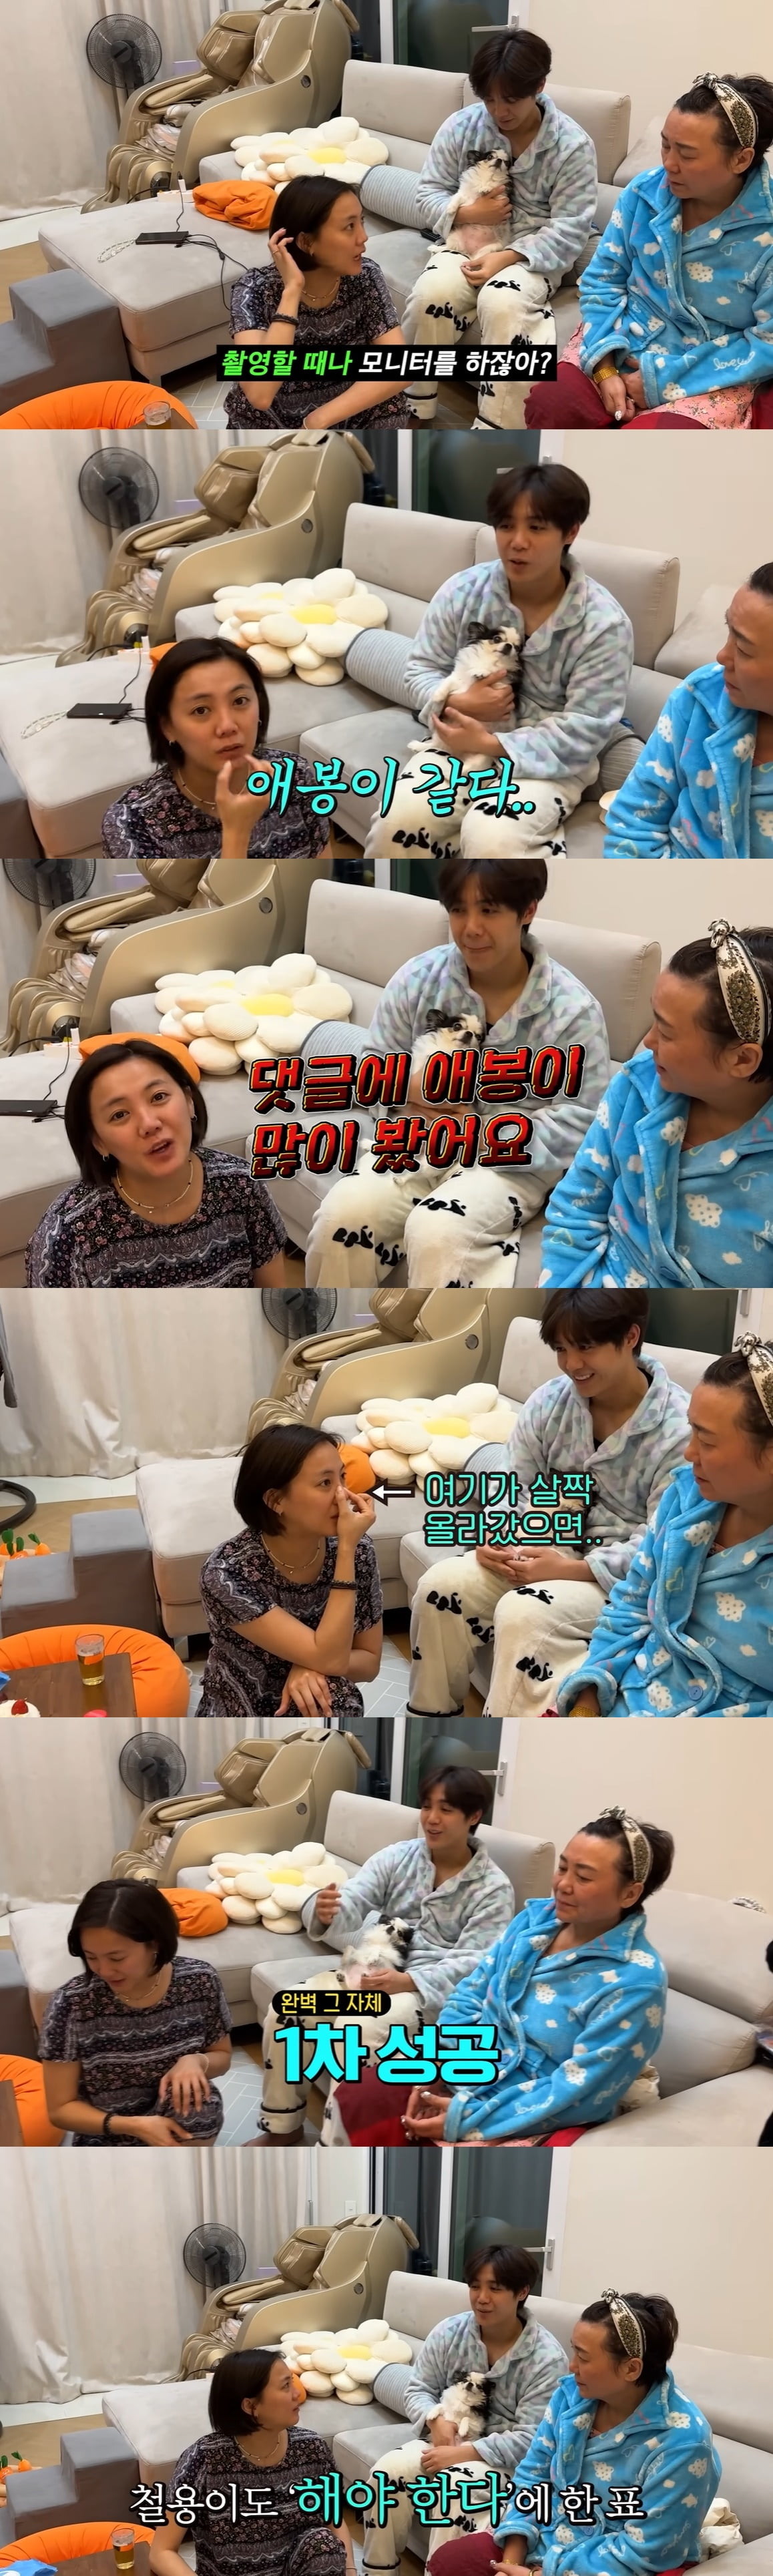 Go Eun-ah “I want to have nose surgery again, but I’m at a loss”